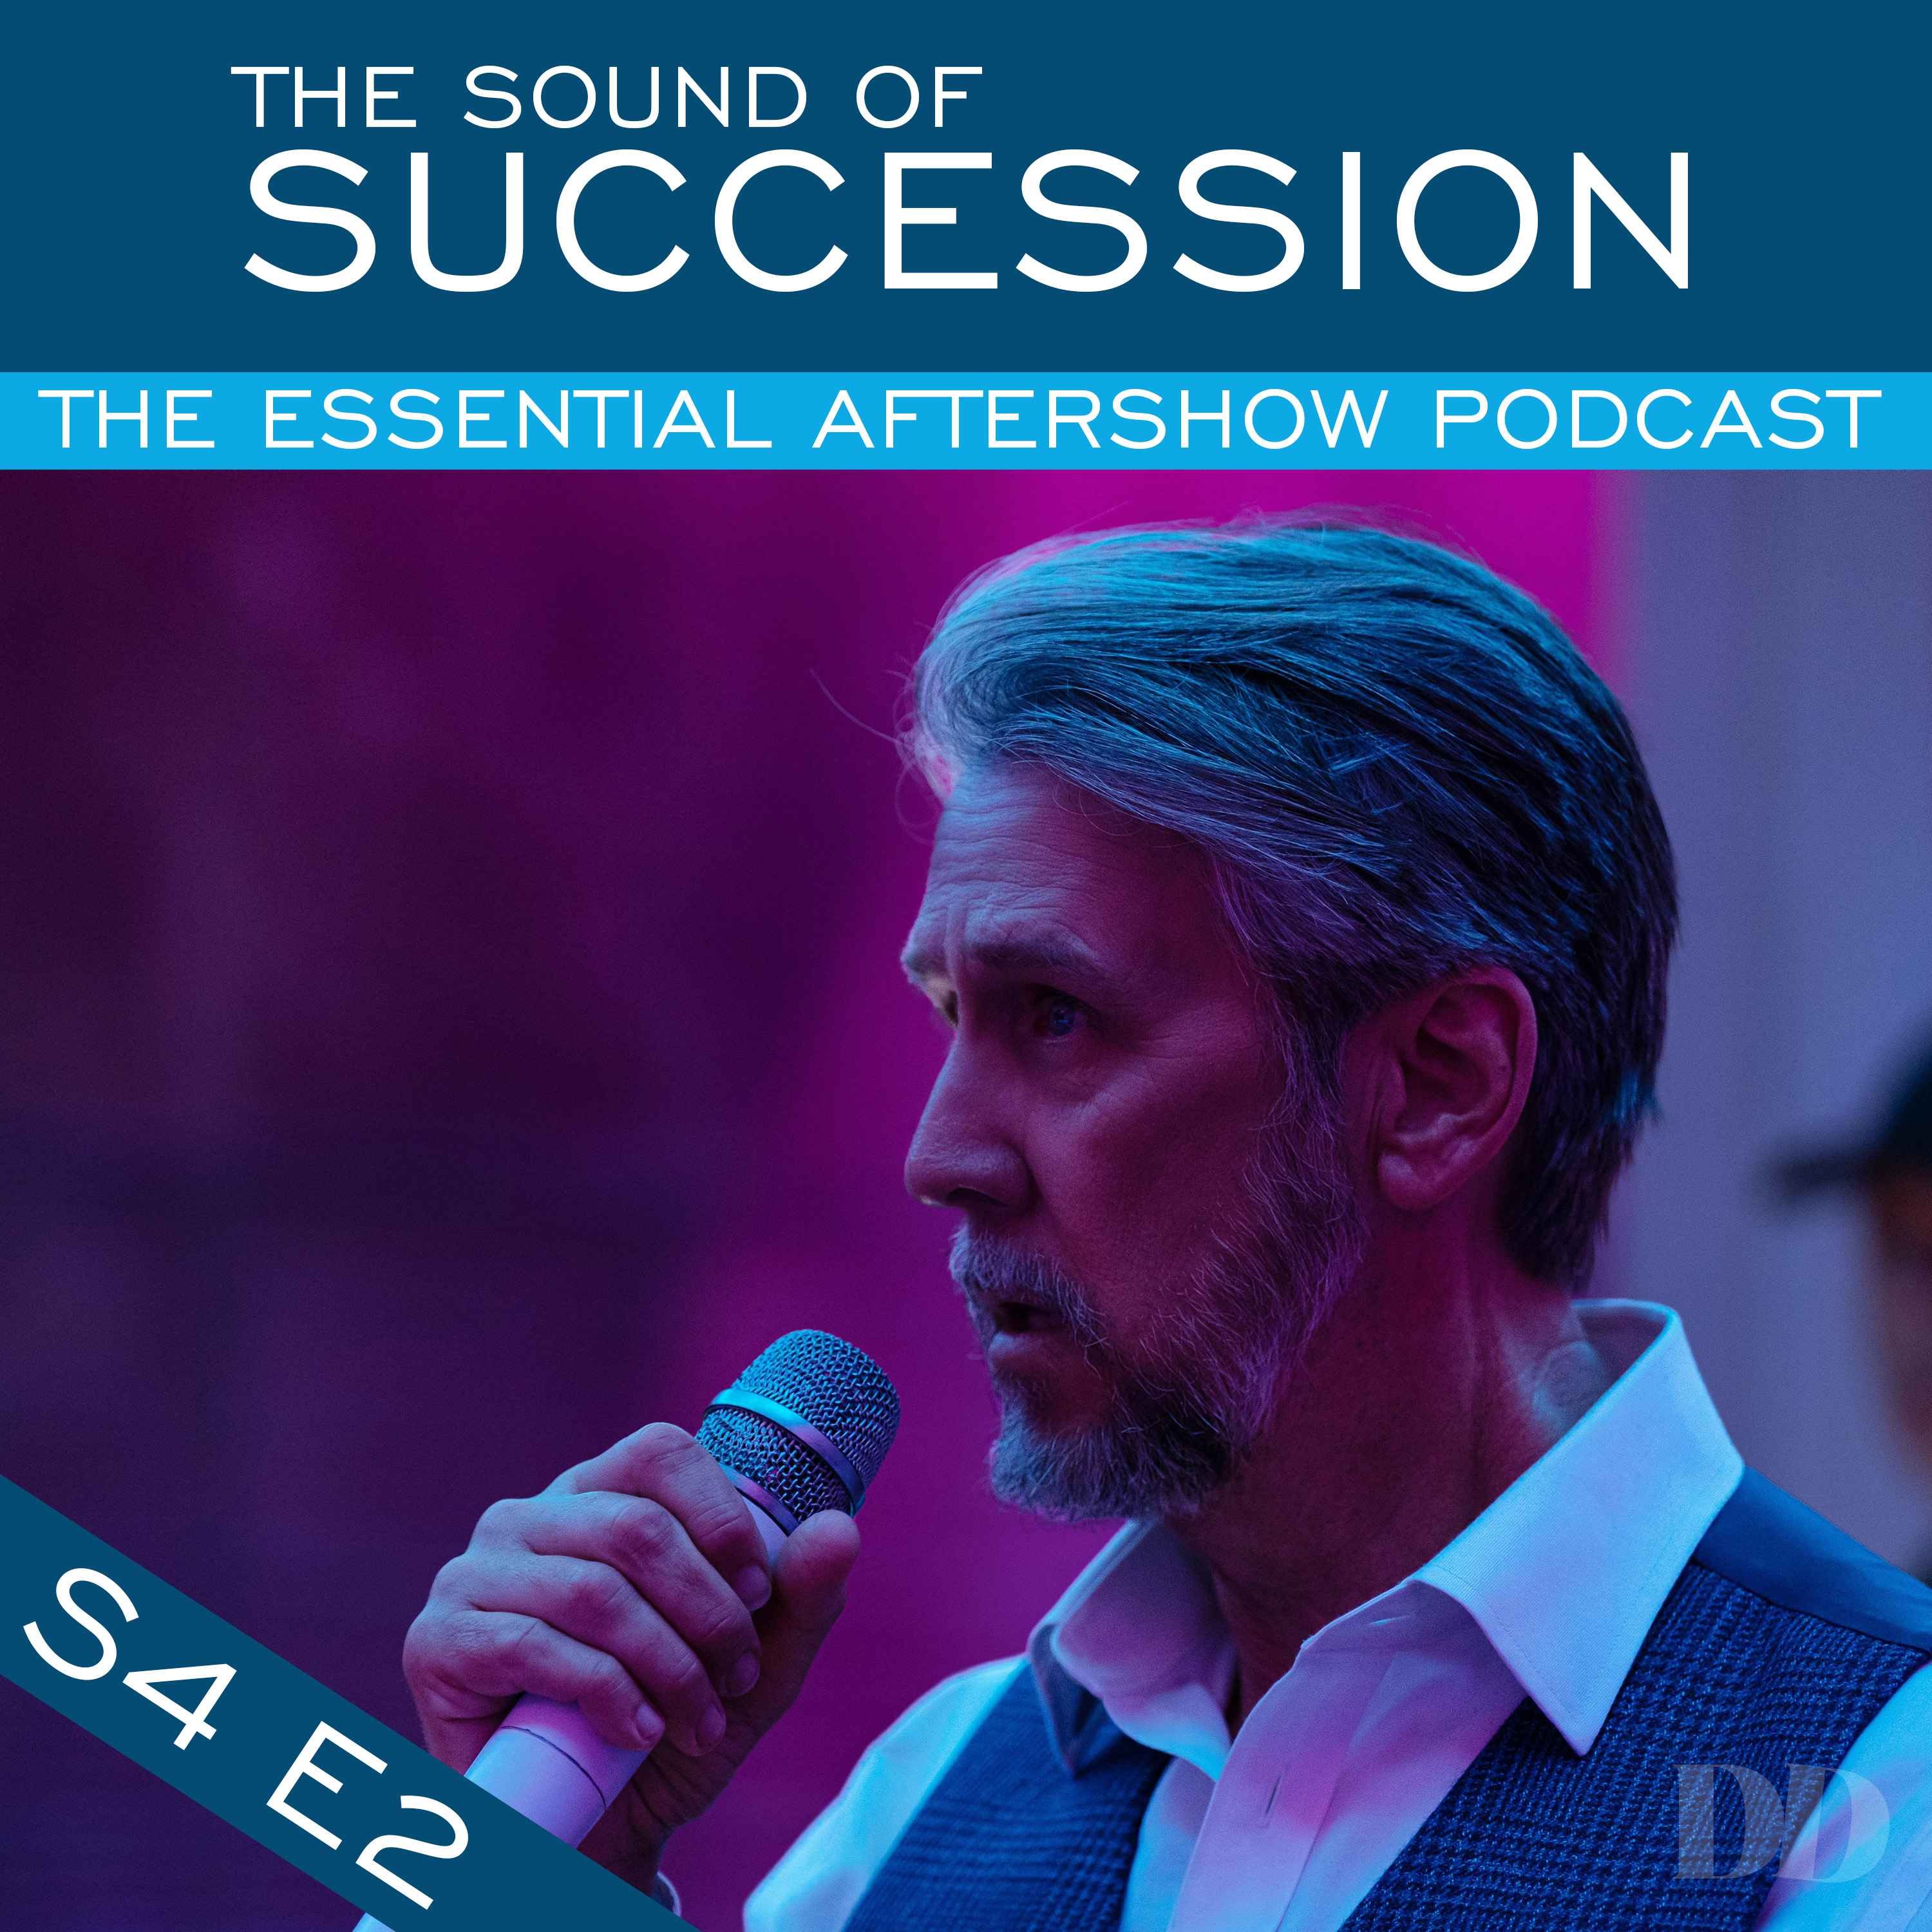 The Sound of Succession Season 4 Episode 2 The Rehearsal The Sound